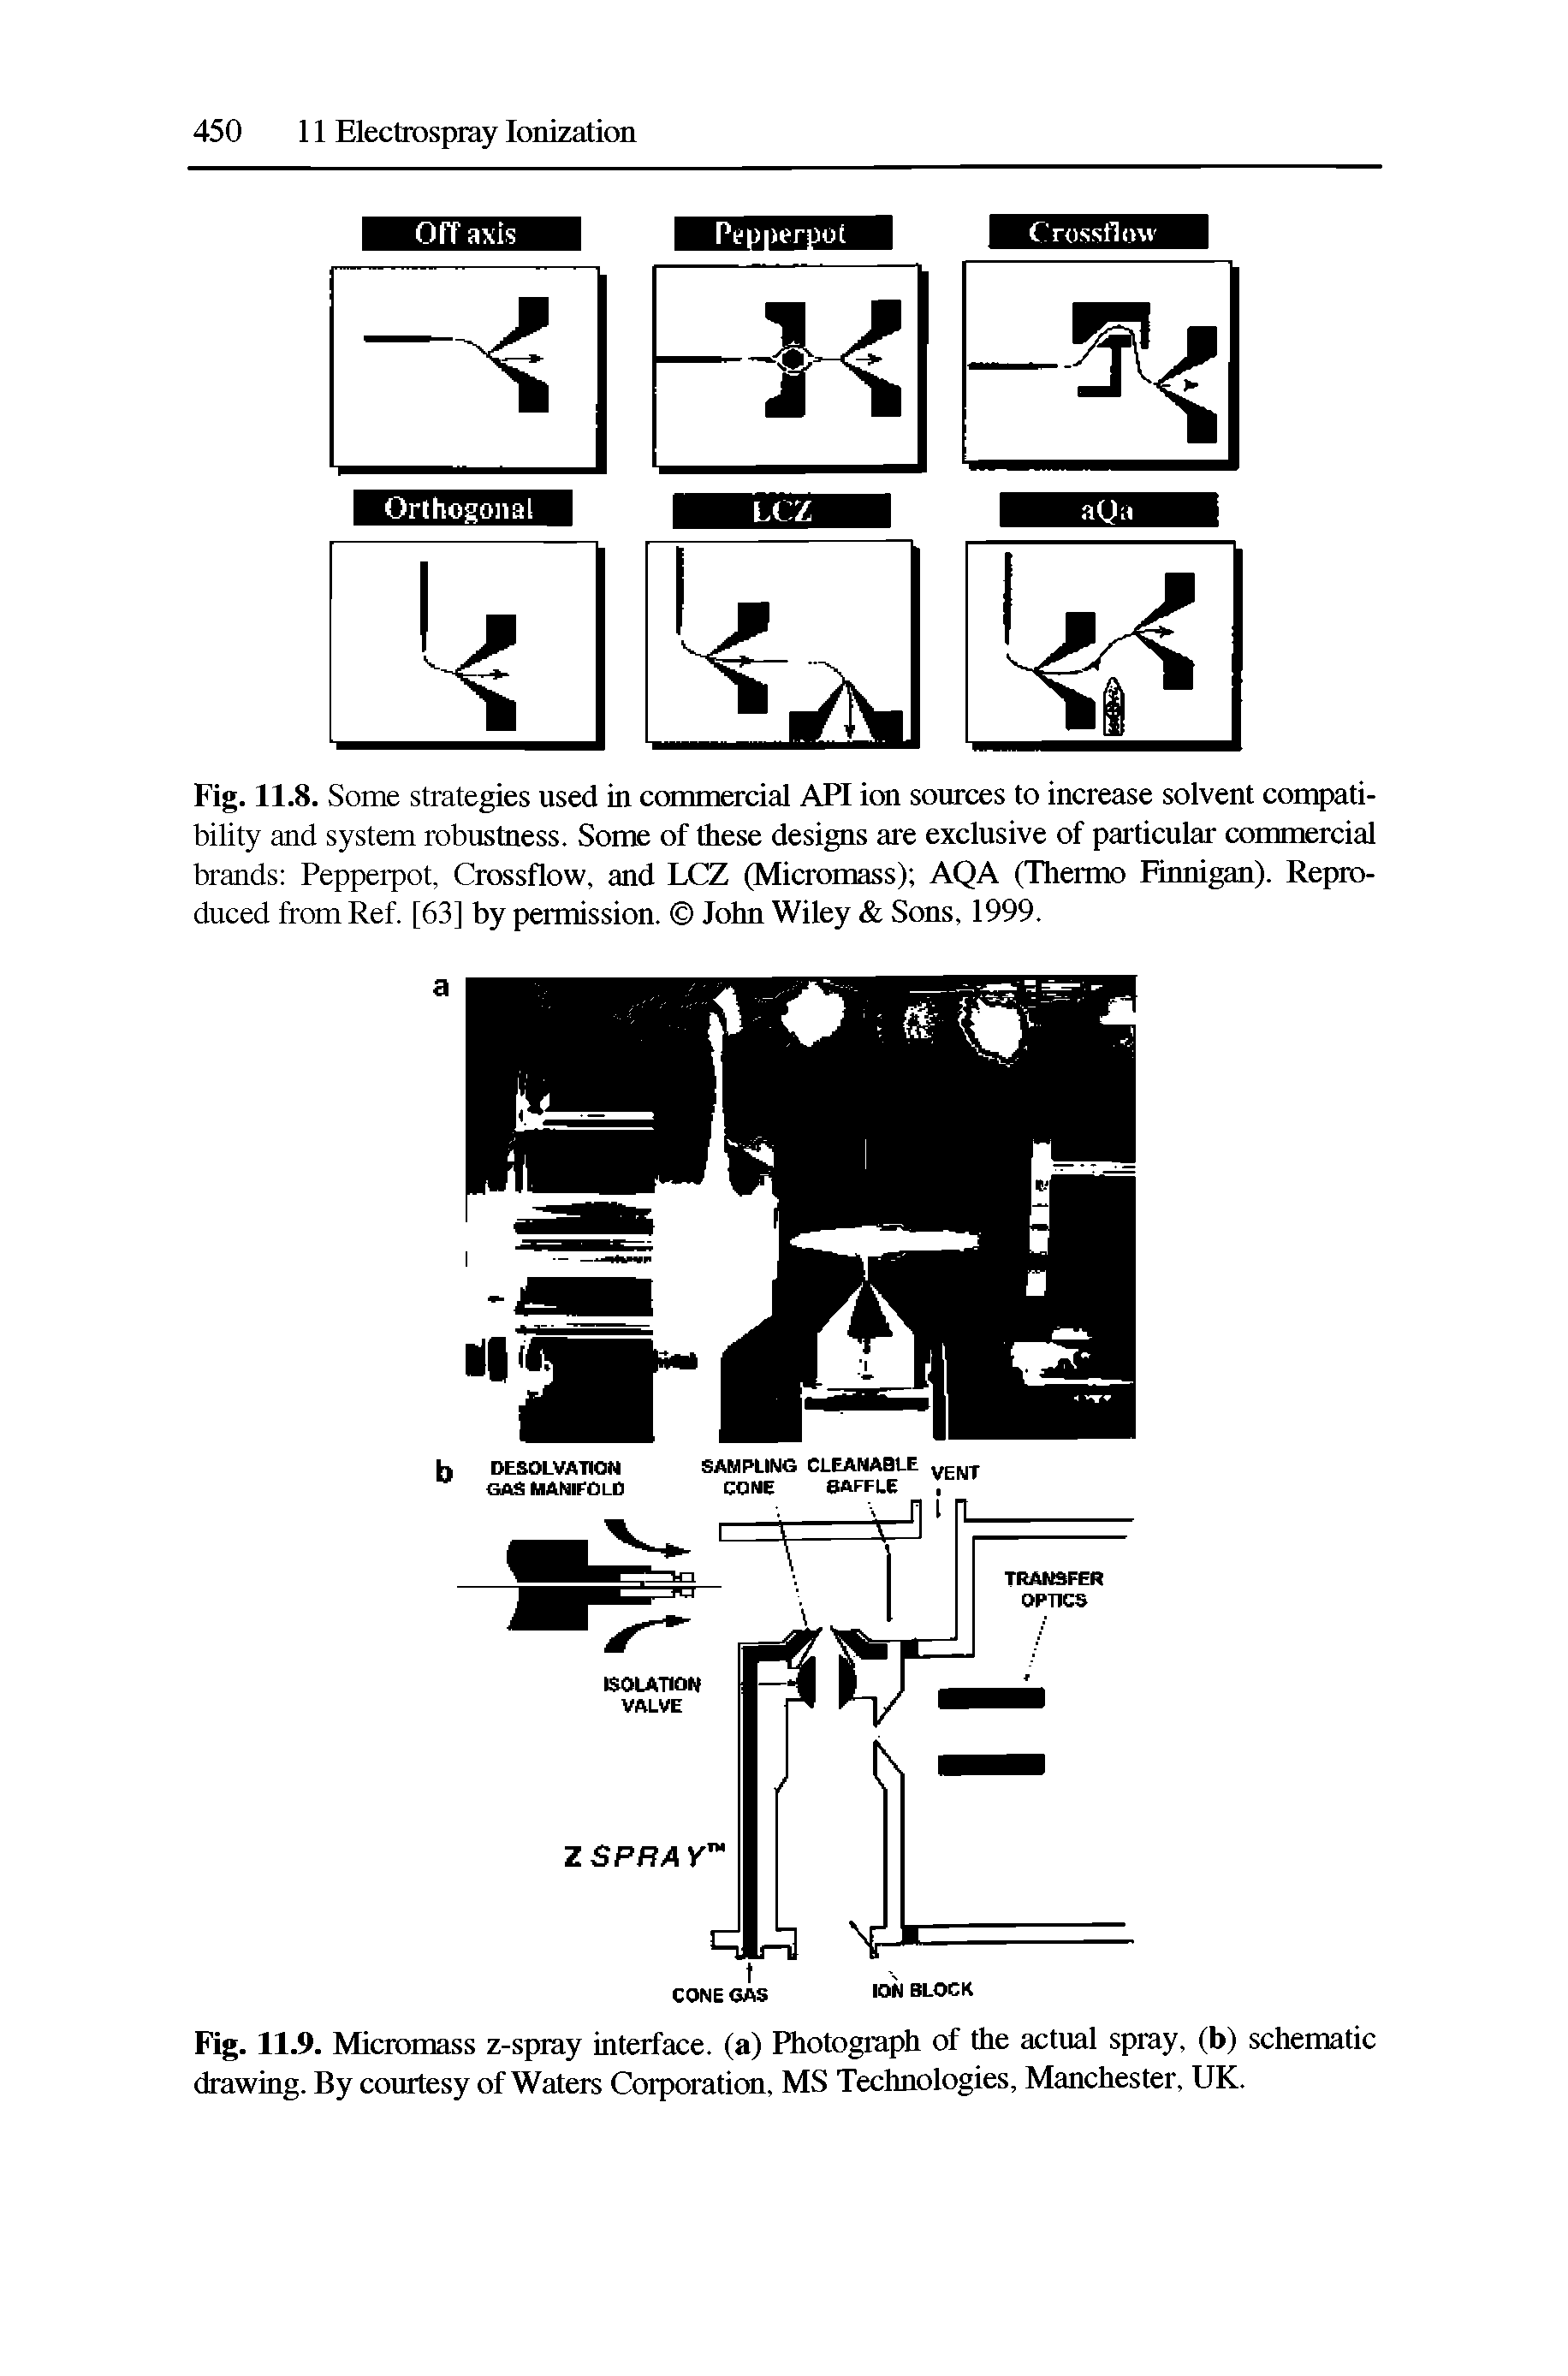 Fig. 11.8. Some strategies used in commercial API ion sources to increase solvent compatibility and system robustness. Some of these designs are exclusive of particular commercial brands Pepperpot, Crossflow, and LCZ (Micromass) AQA (Thermo Finnigan). Reproduced from Ref. [63] by permission. John Wiley Sons, 1999.